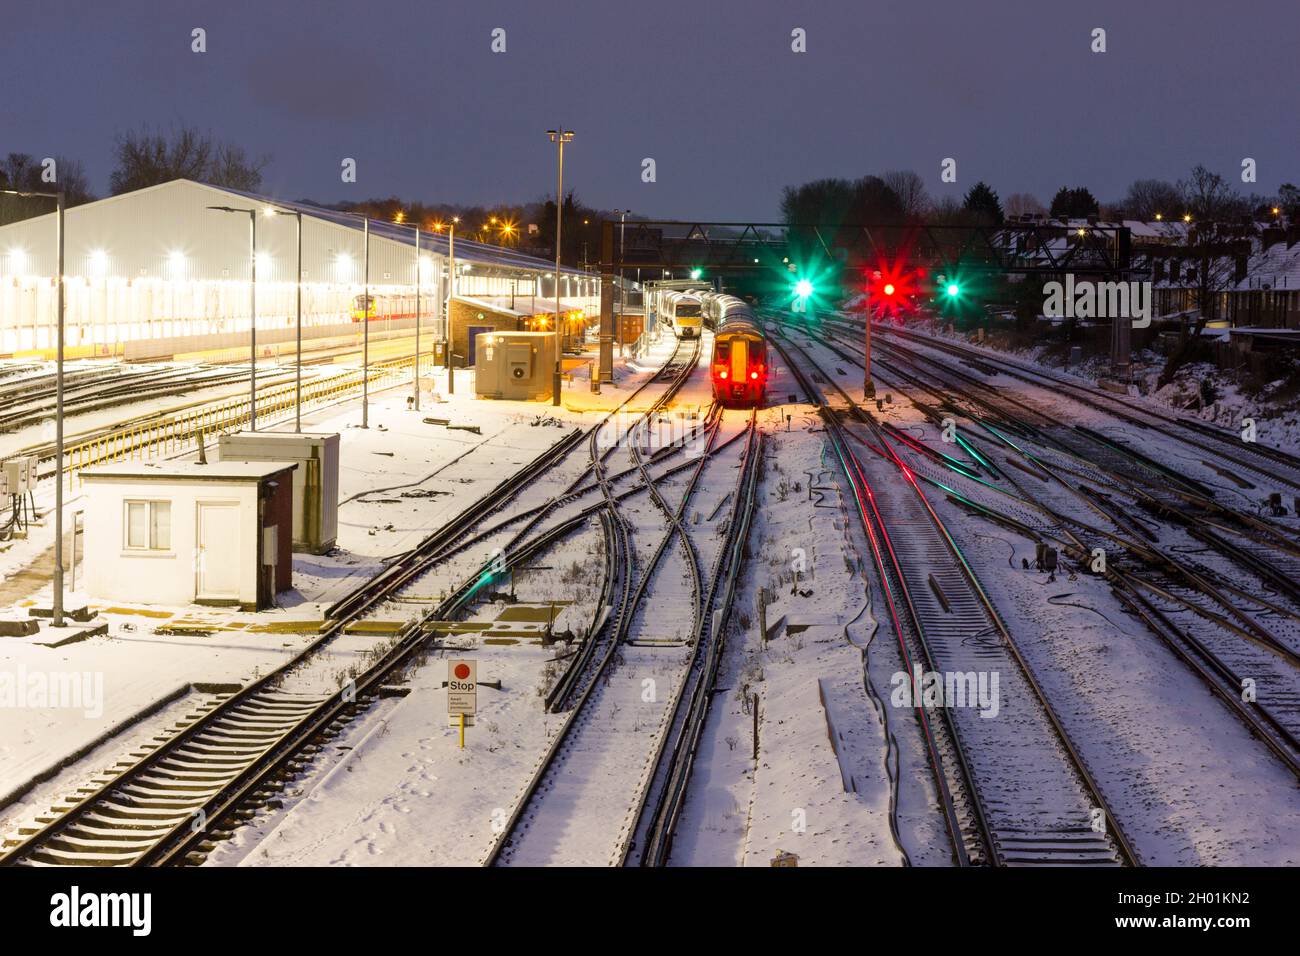 Trains stand still under heavy snow on national network railway tracks, traffic lights, South London England UK weather Stock Photo